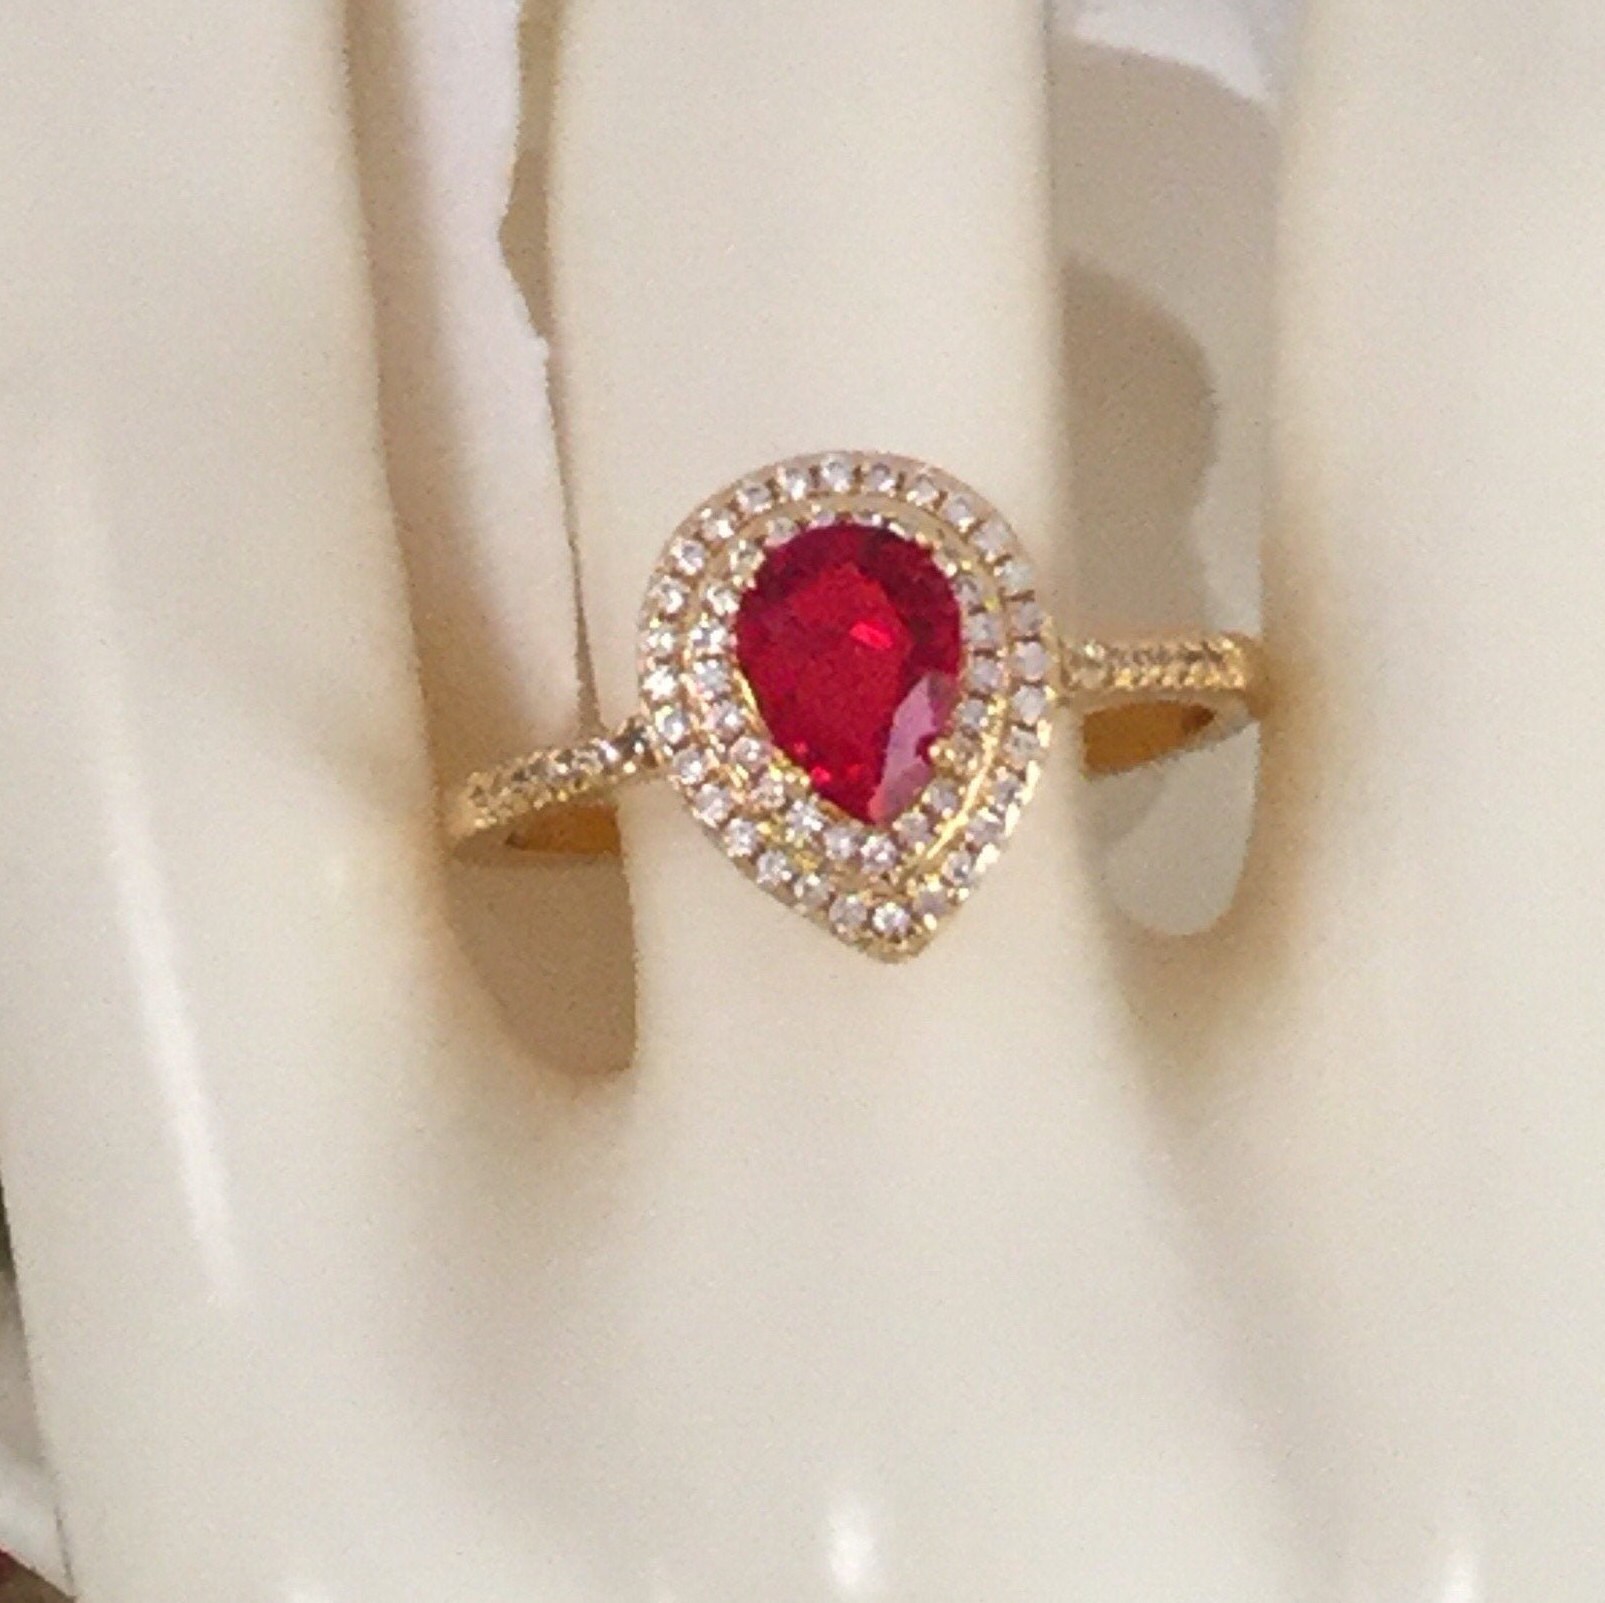 Vintage Jewellery Yellow Gold Ring with Teardrop Ruby and White Sapphires Antique Art Deco Dress Jewelry medium ring size 8